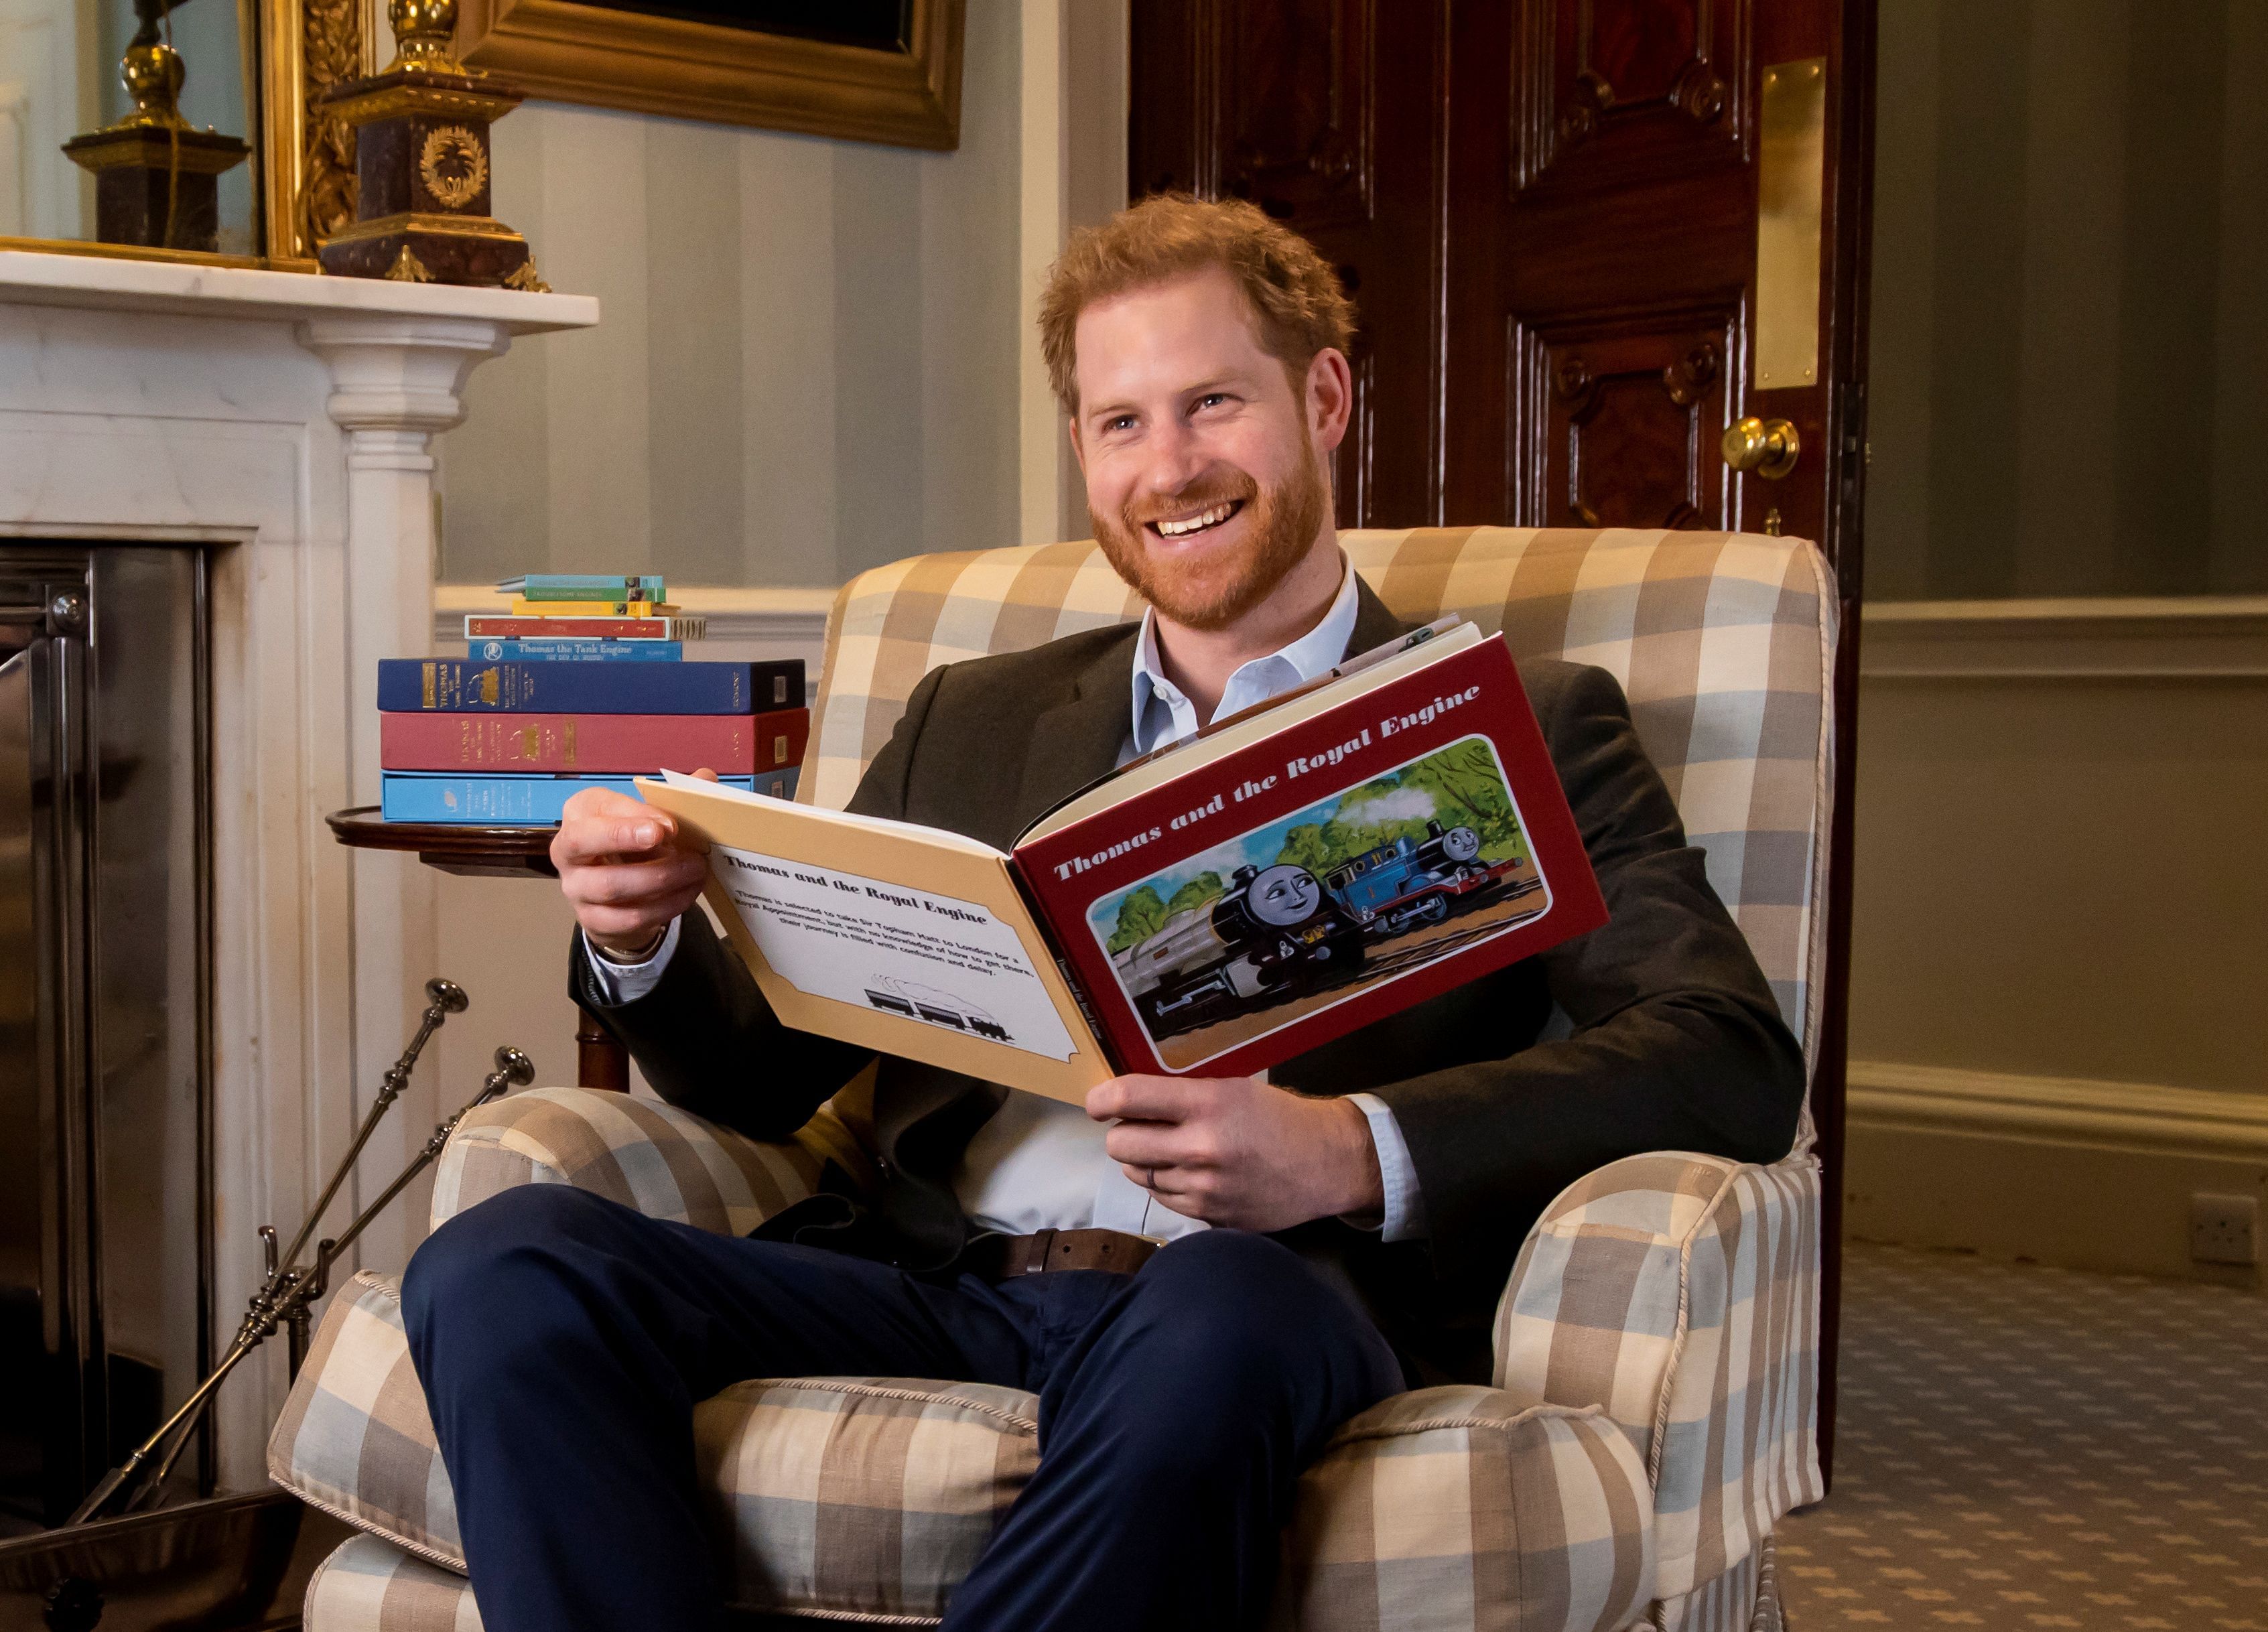 Britain's Prince Harry is pictured during the recording of his on-camera introduction to the new animated special "Thomas & Friends: The Royal Engine" featuring Britain's Queen Elizabeth and Britain's Prince Charles as a child. (Reuters)